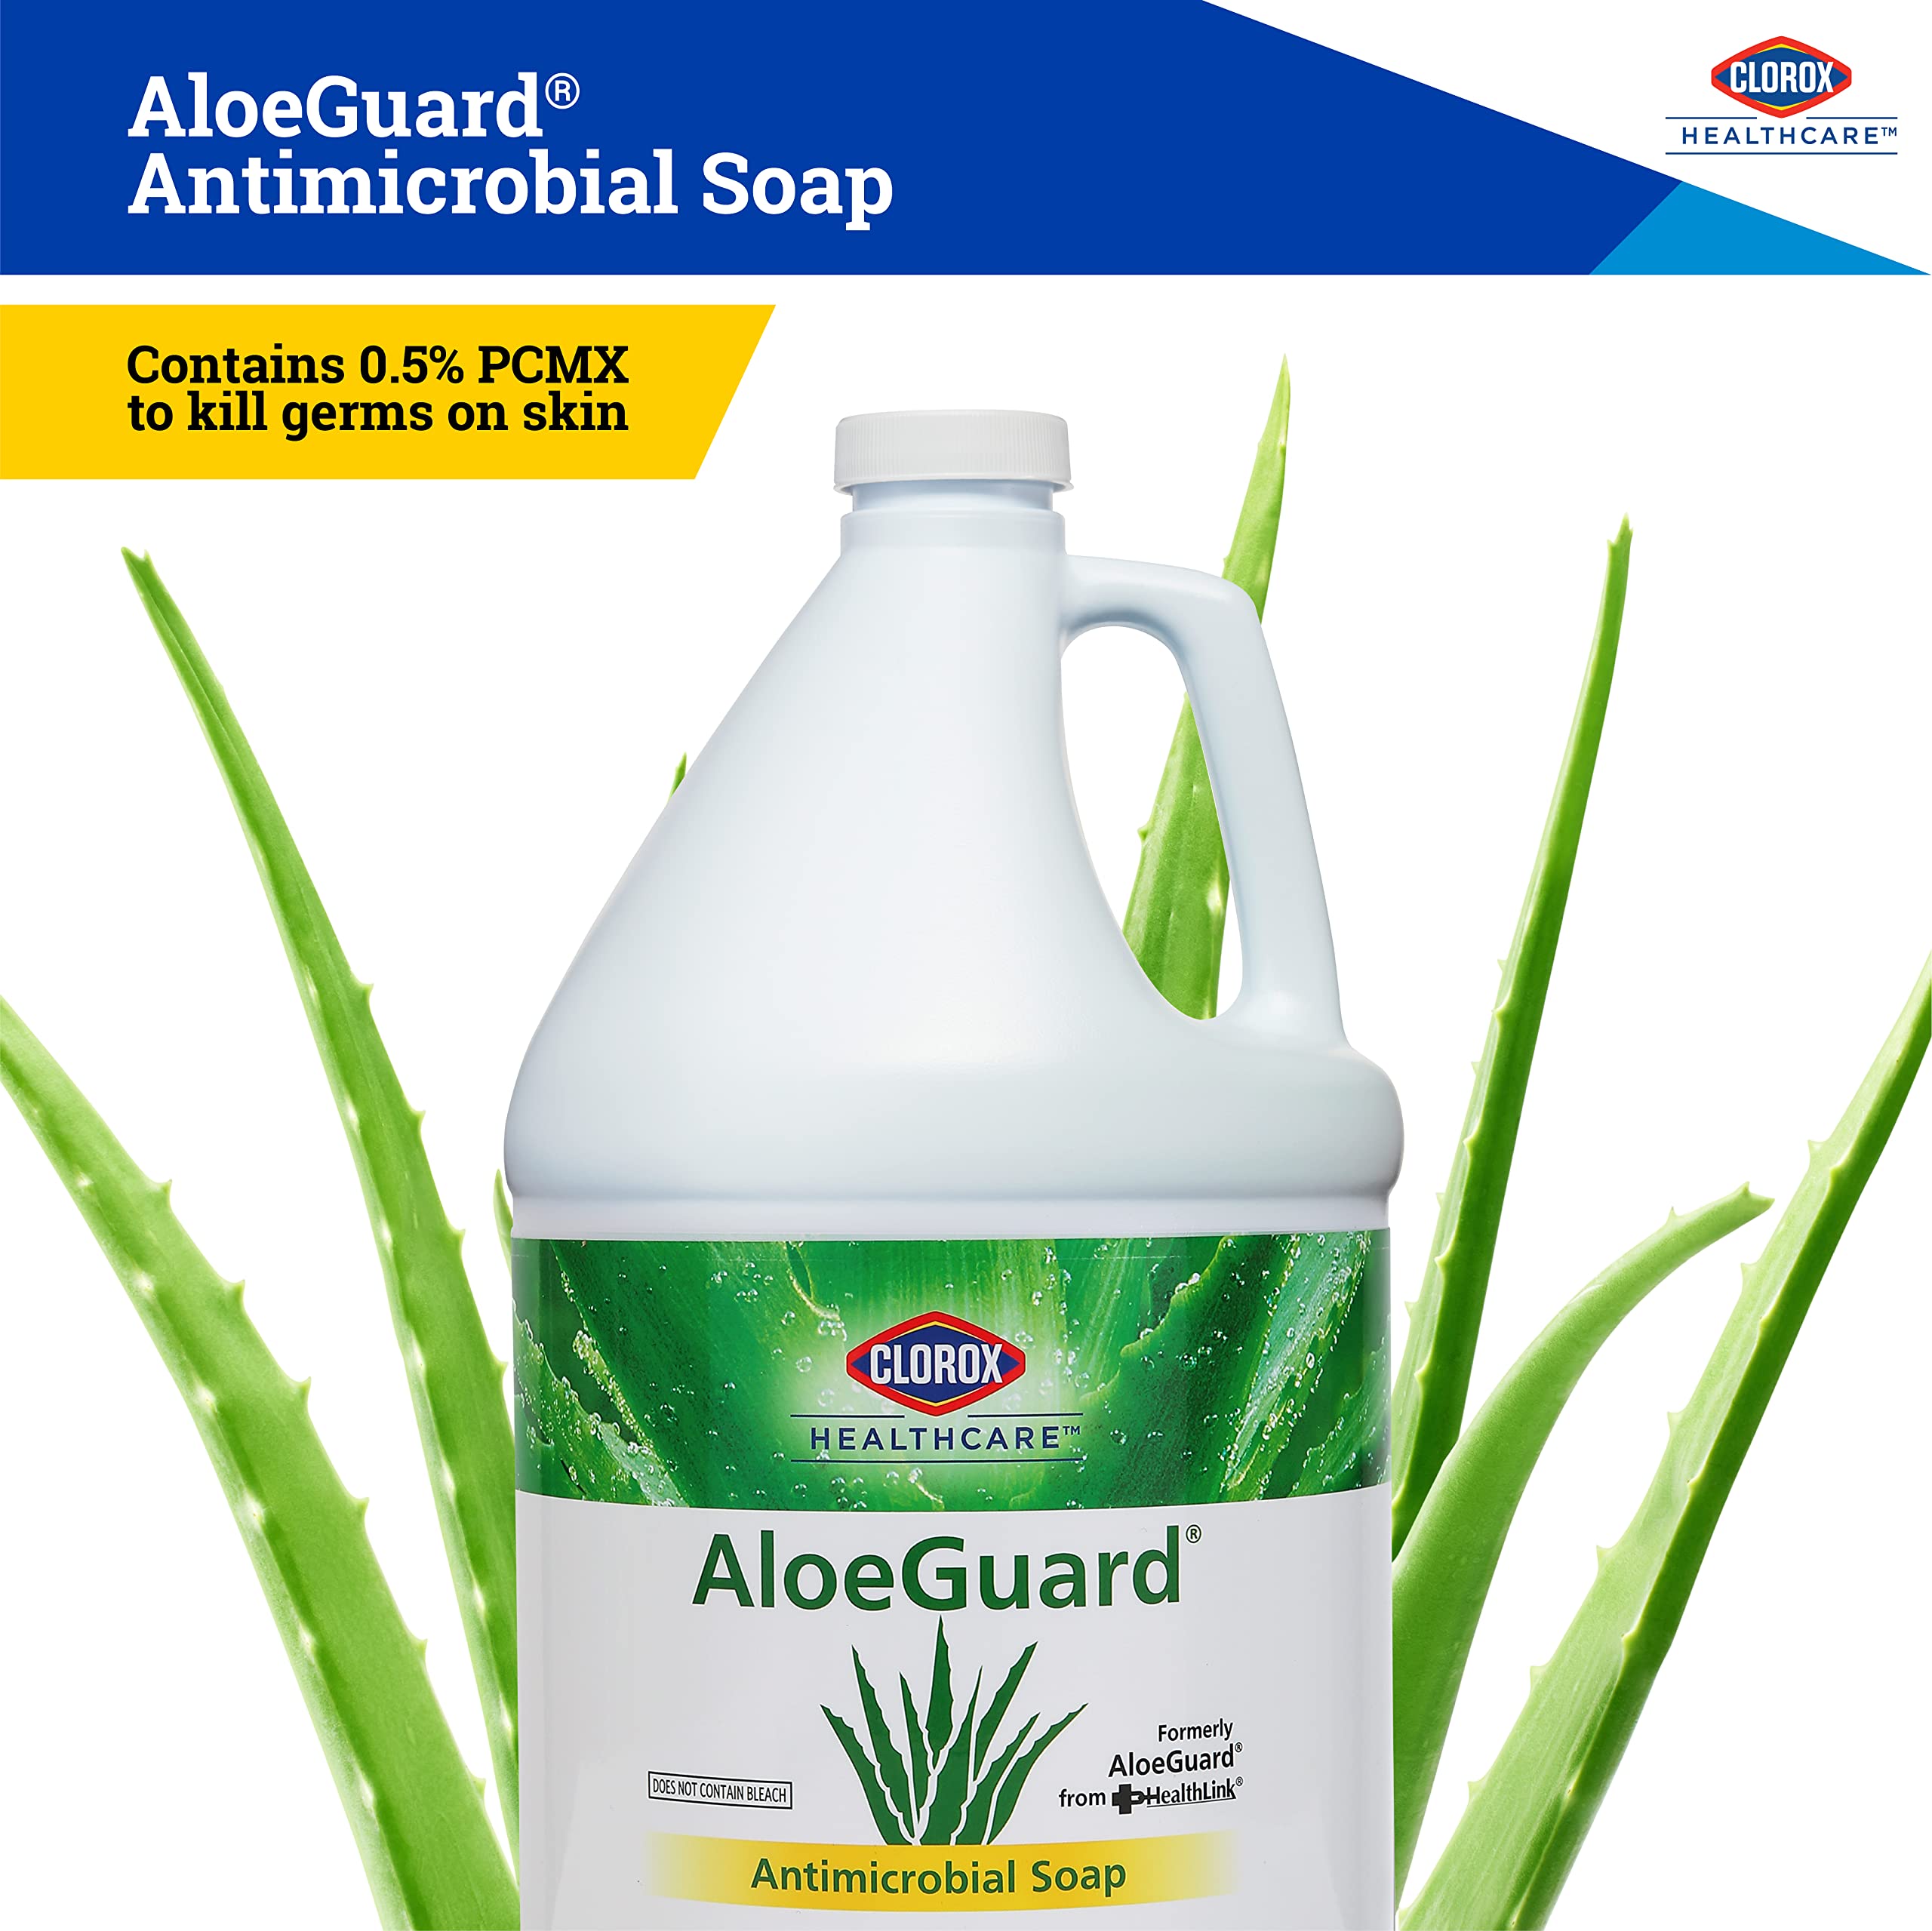 Clorox Healthcare AloeGuard Antimicrobial Soap, 1 Gallon Bottle | Antimicrobial Hand Soap for Healthcare Professionals and Everyday Use | Hand Soap Bulk (4 Pack)